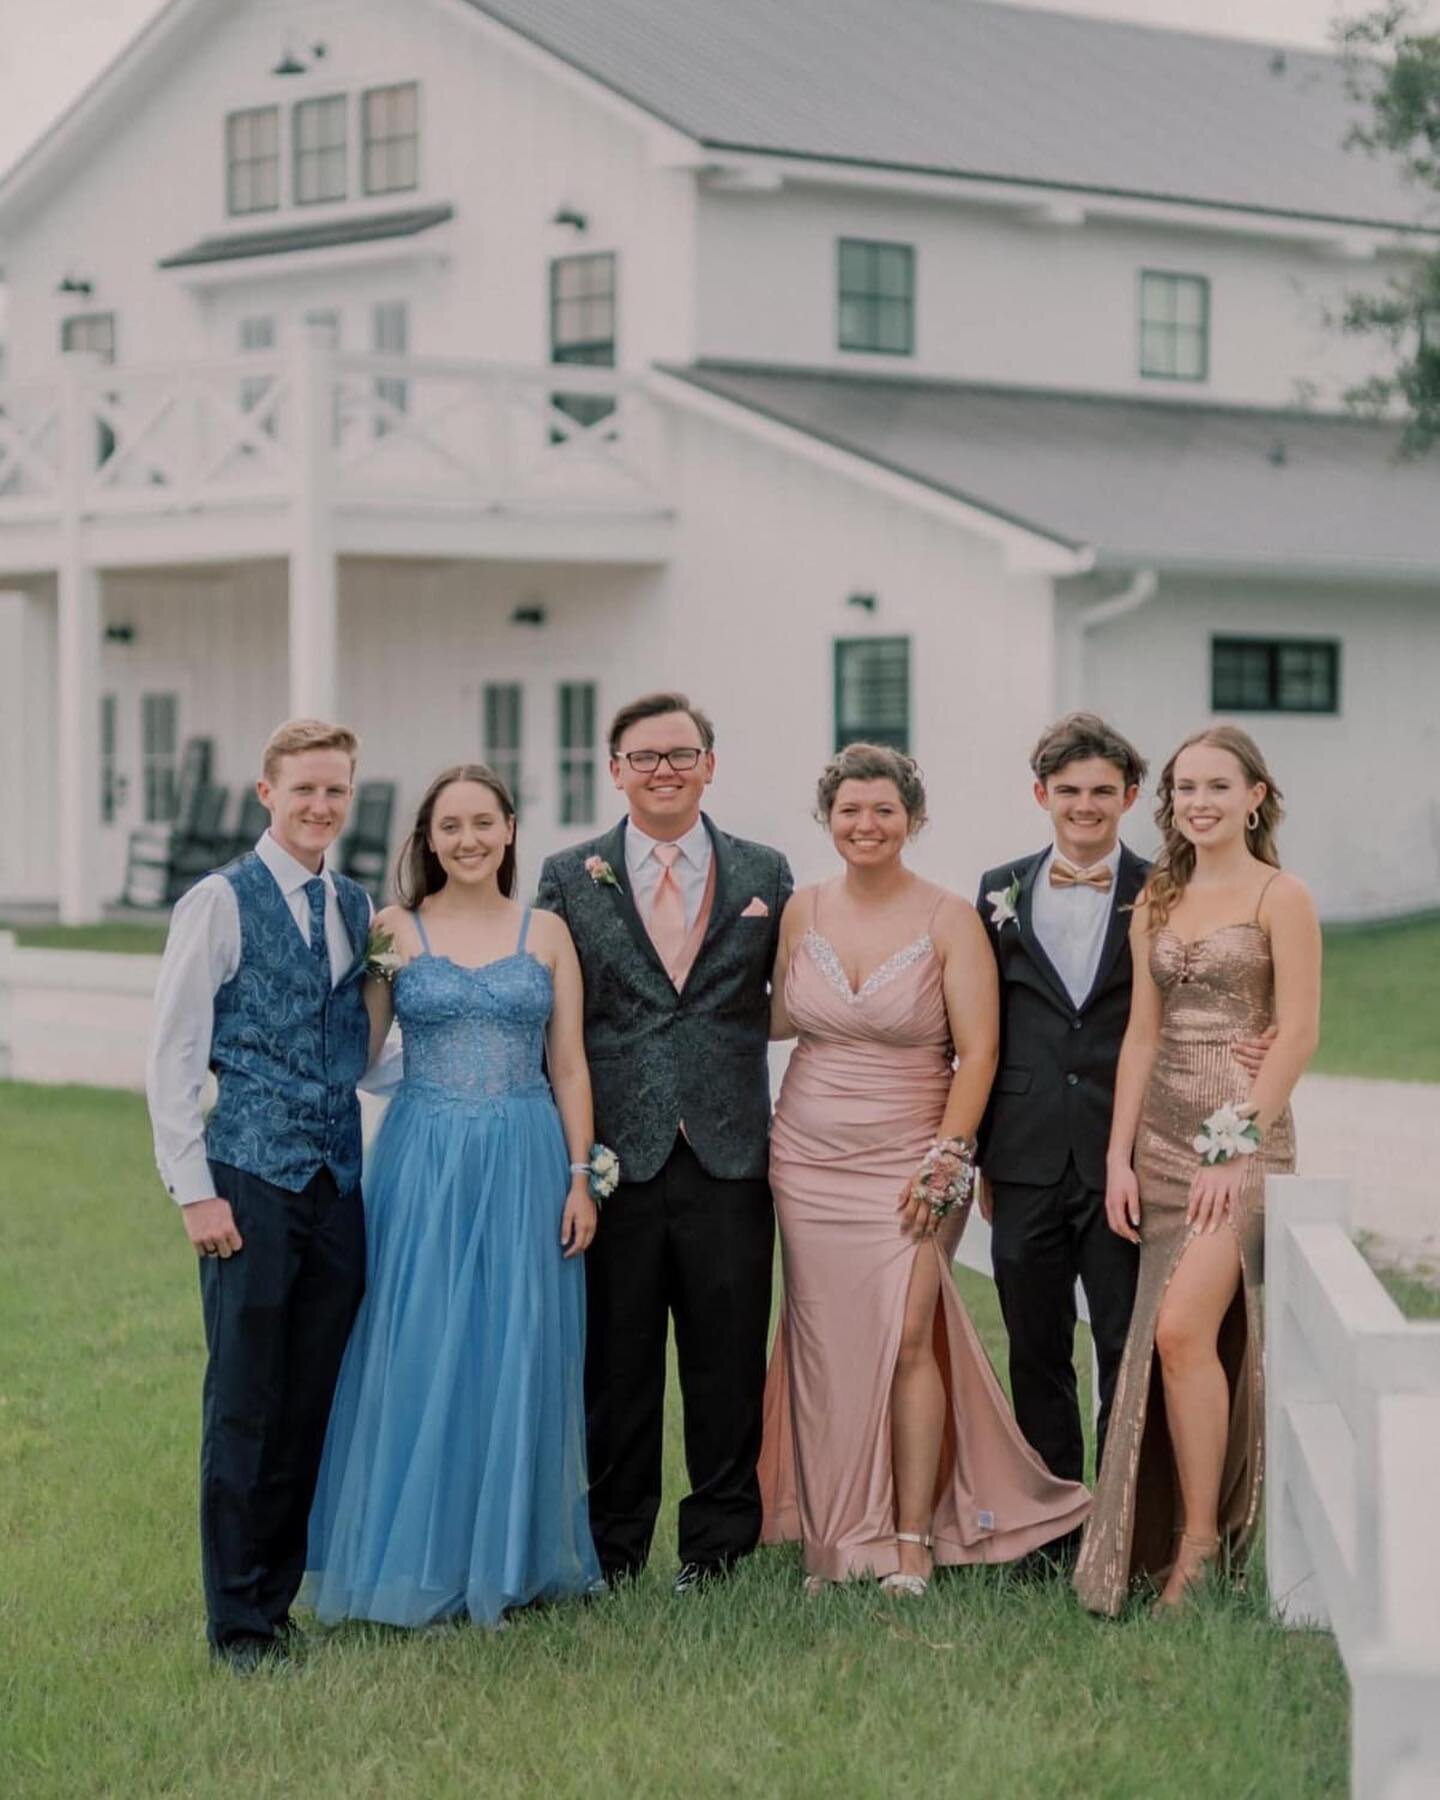 We so enjoyed hosting Grace Christian School&rsquo;s prom this weekend! The students had a BLAST and were dancing, singing, and laughing all night long. Thank you to all who made this dance so special for them😇

Photography: @michelle_schelm 
&bull;